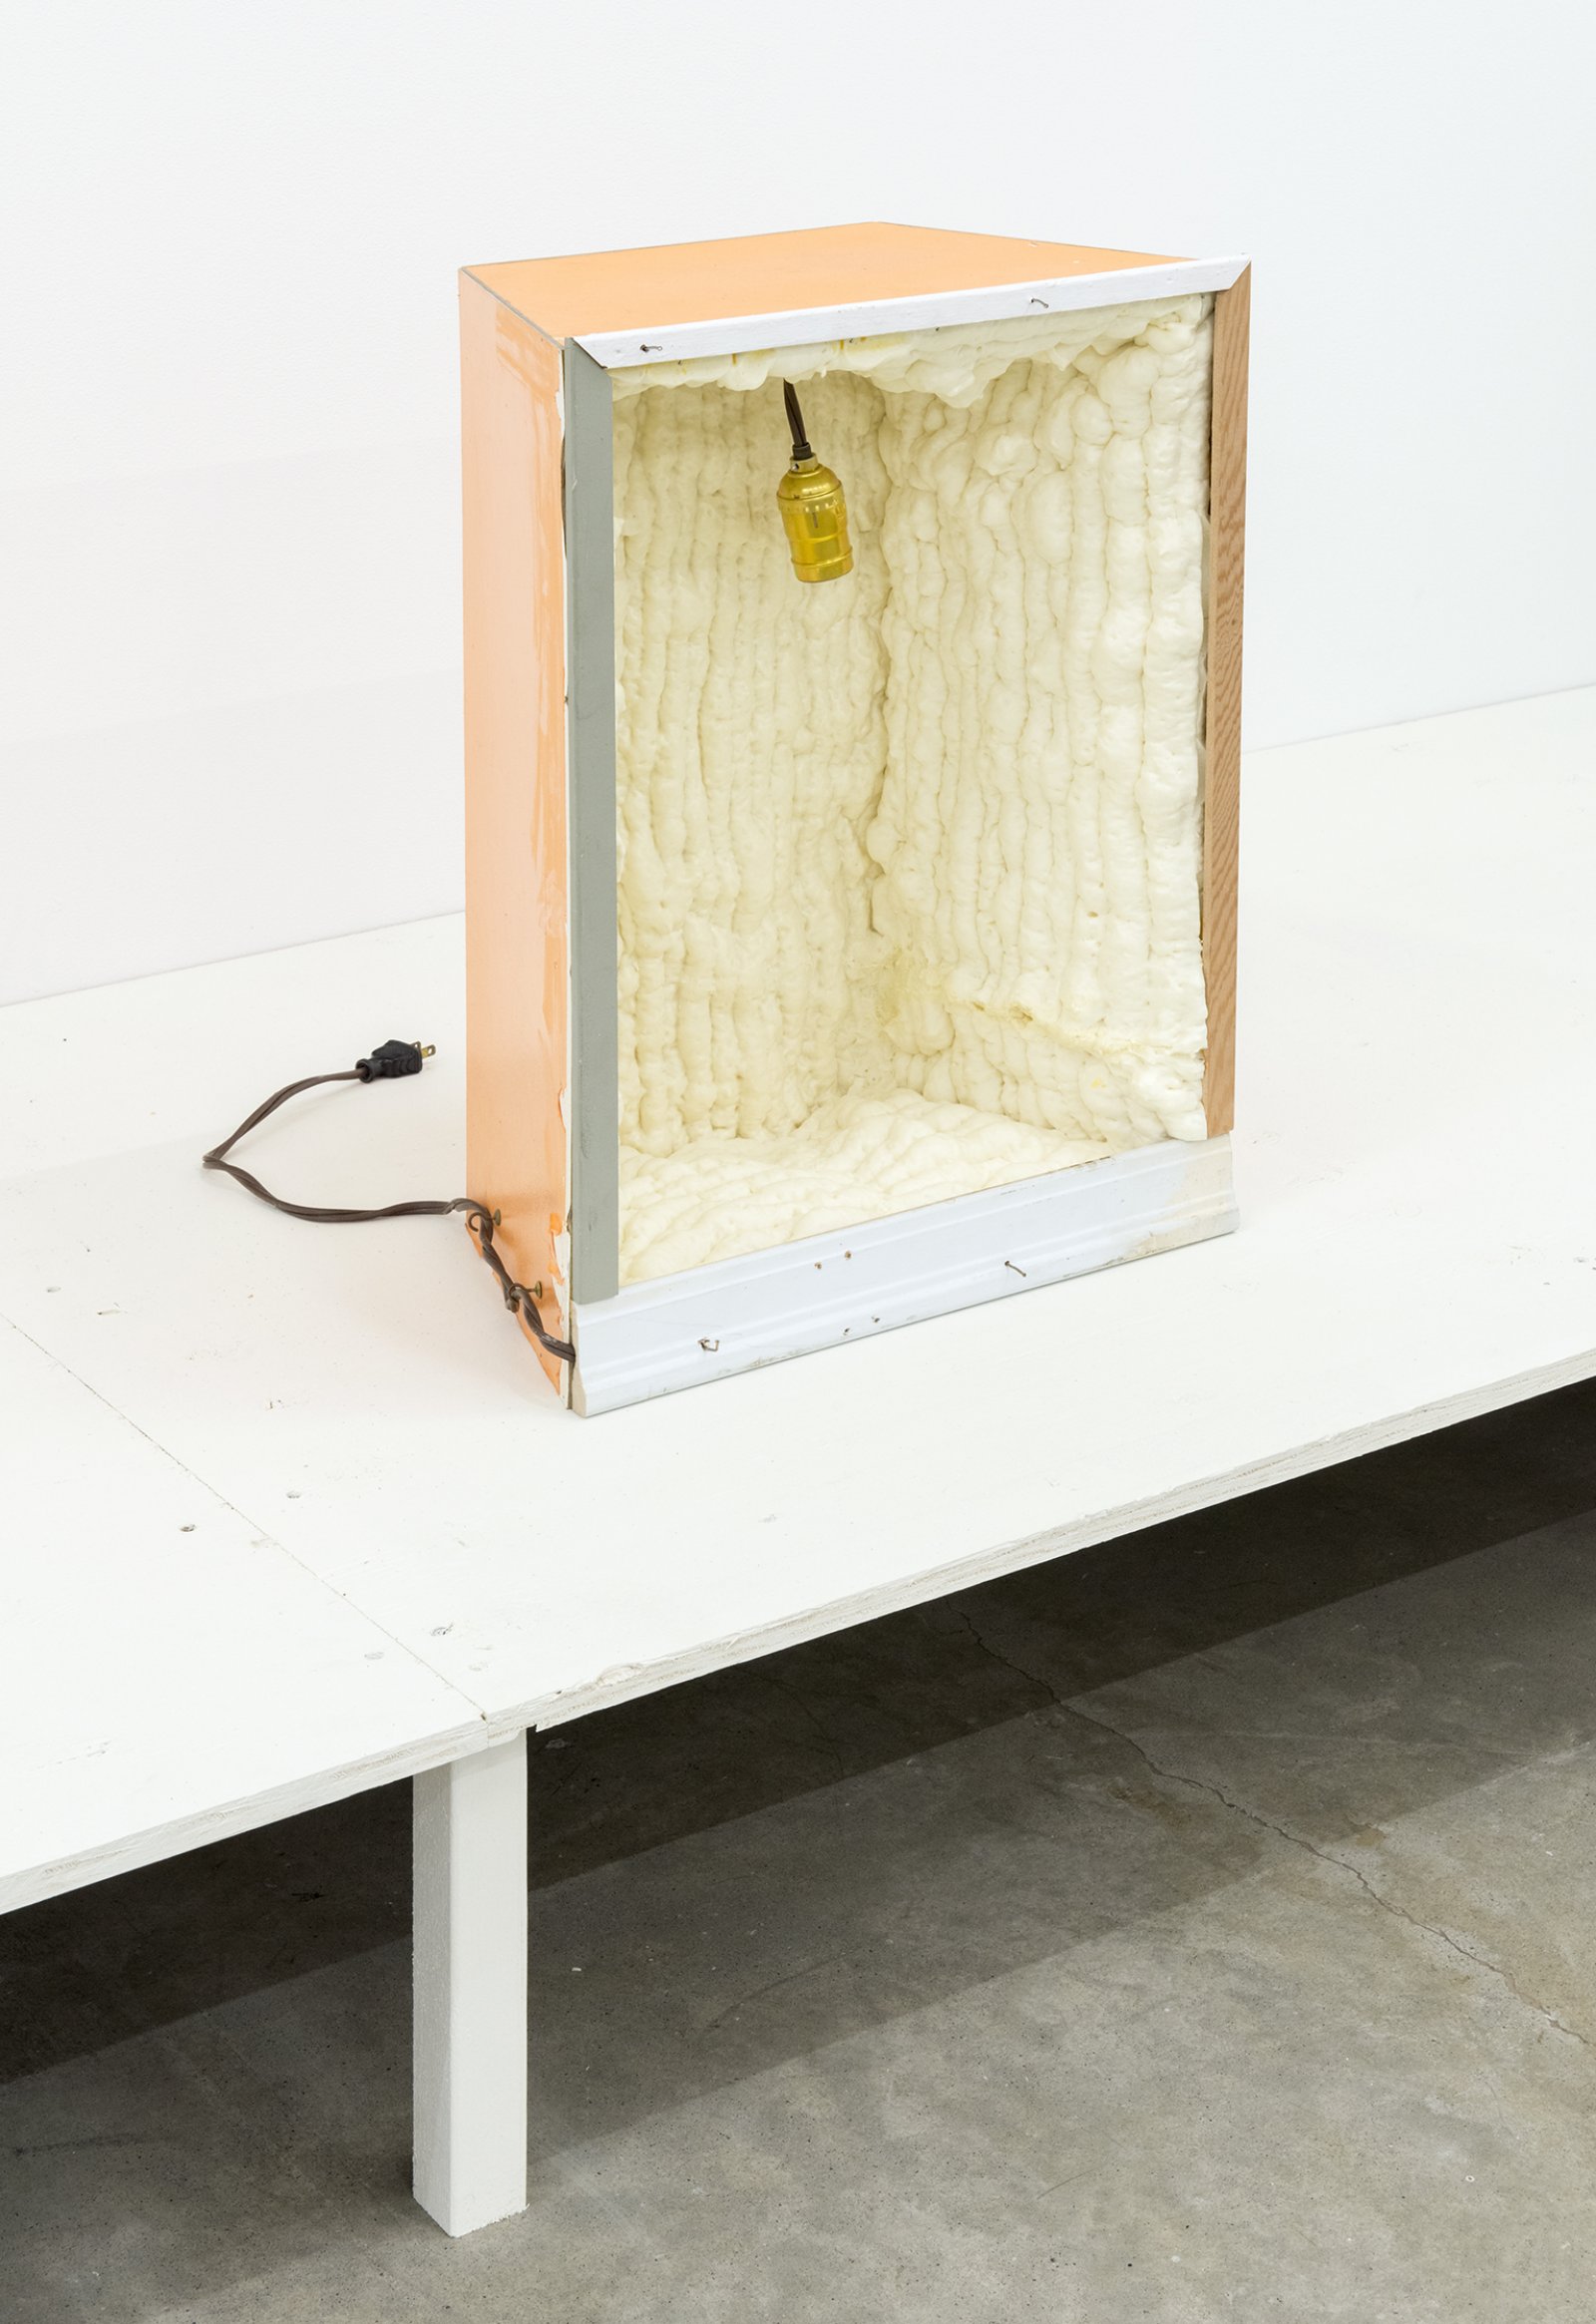 Gareth Moore, W-05e, 2013, expanding installation foam, pressboard, wood trim, nails, paint, light socket with plug, 21 x 16 x 10 in. (53 x 41 x 24 cm) by Ashes Withyman